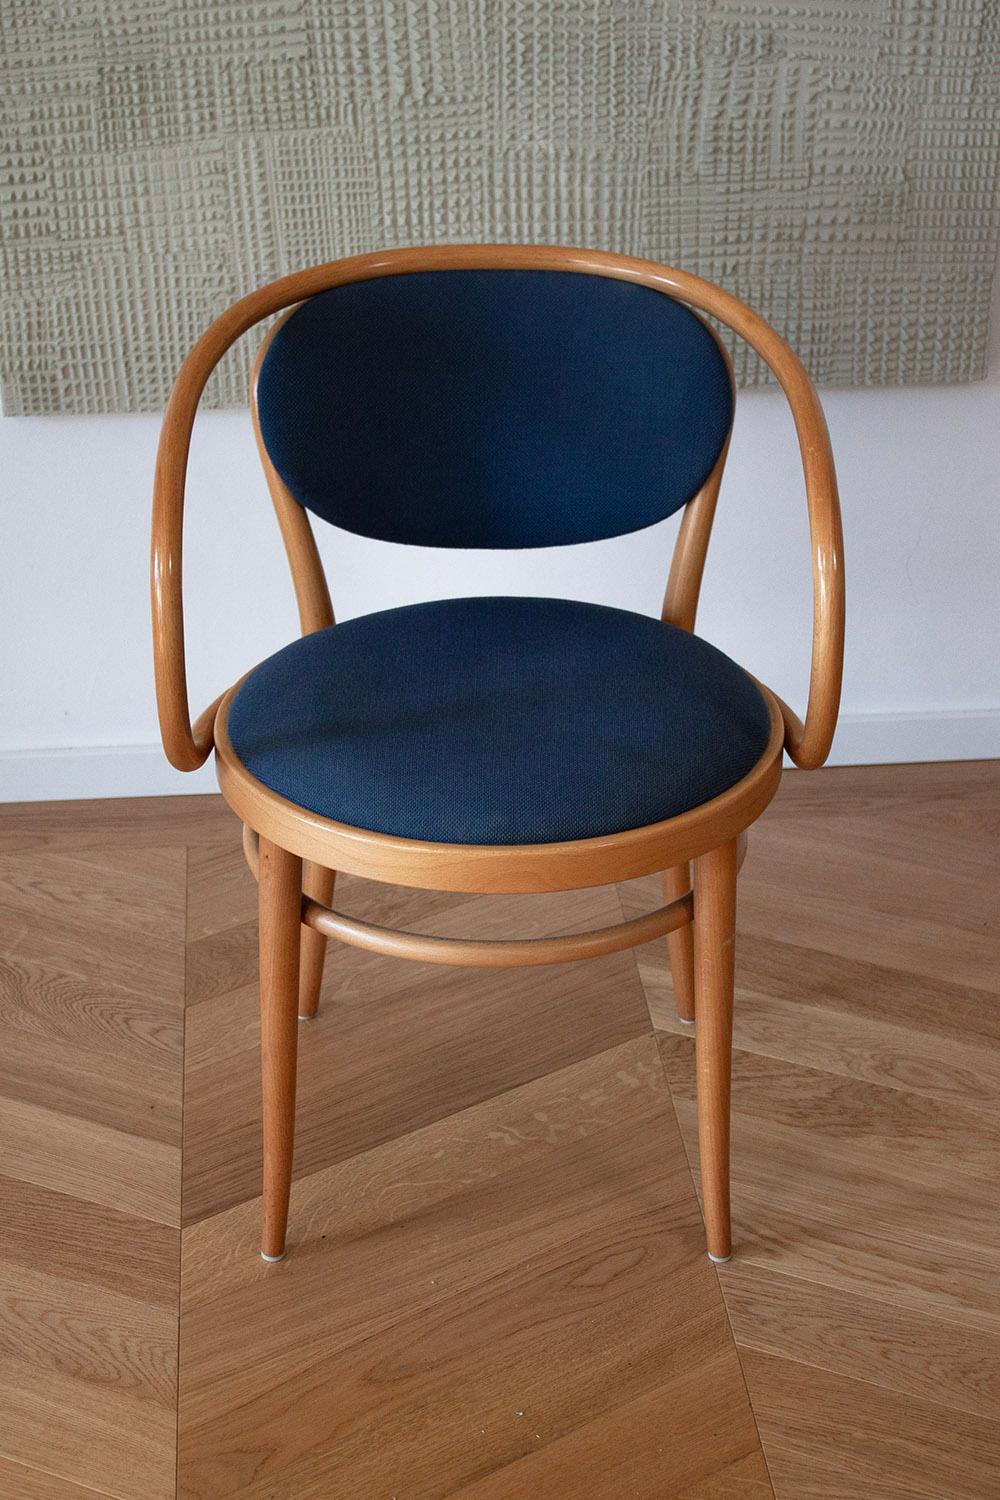 The Thonet 209 is a timeless classic. The brother Thonet designed this elegant Chair design already in 1900. This chair has a simple and minimal aesthetic which almost gives the chair a sculptural feel. 

The Swiss architect Le Corbusier used to